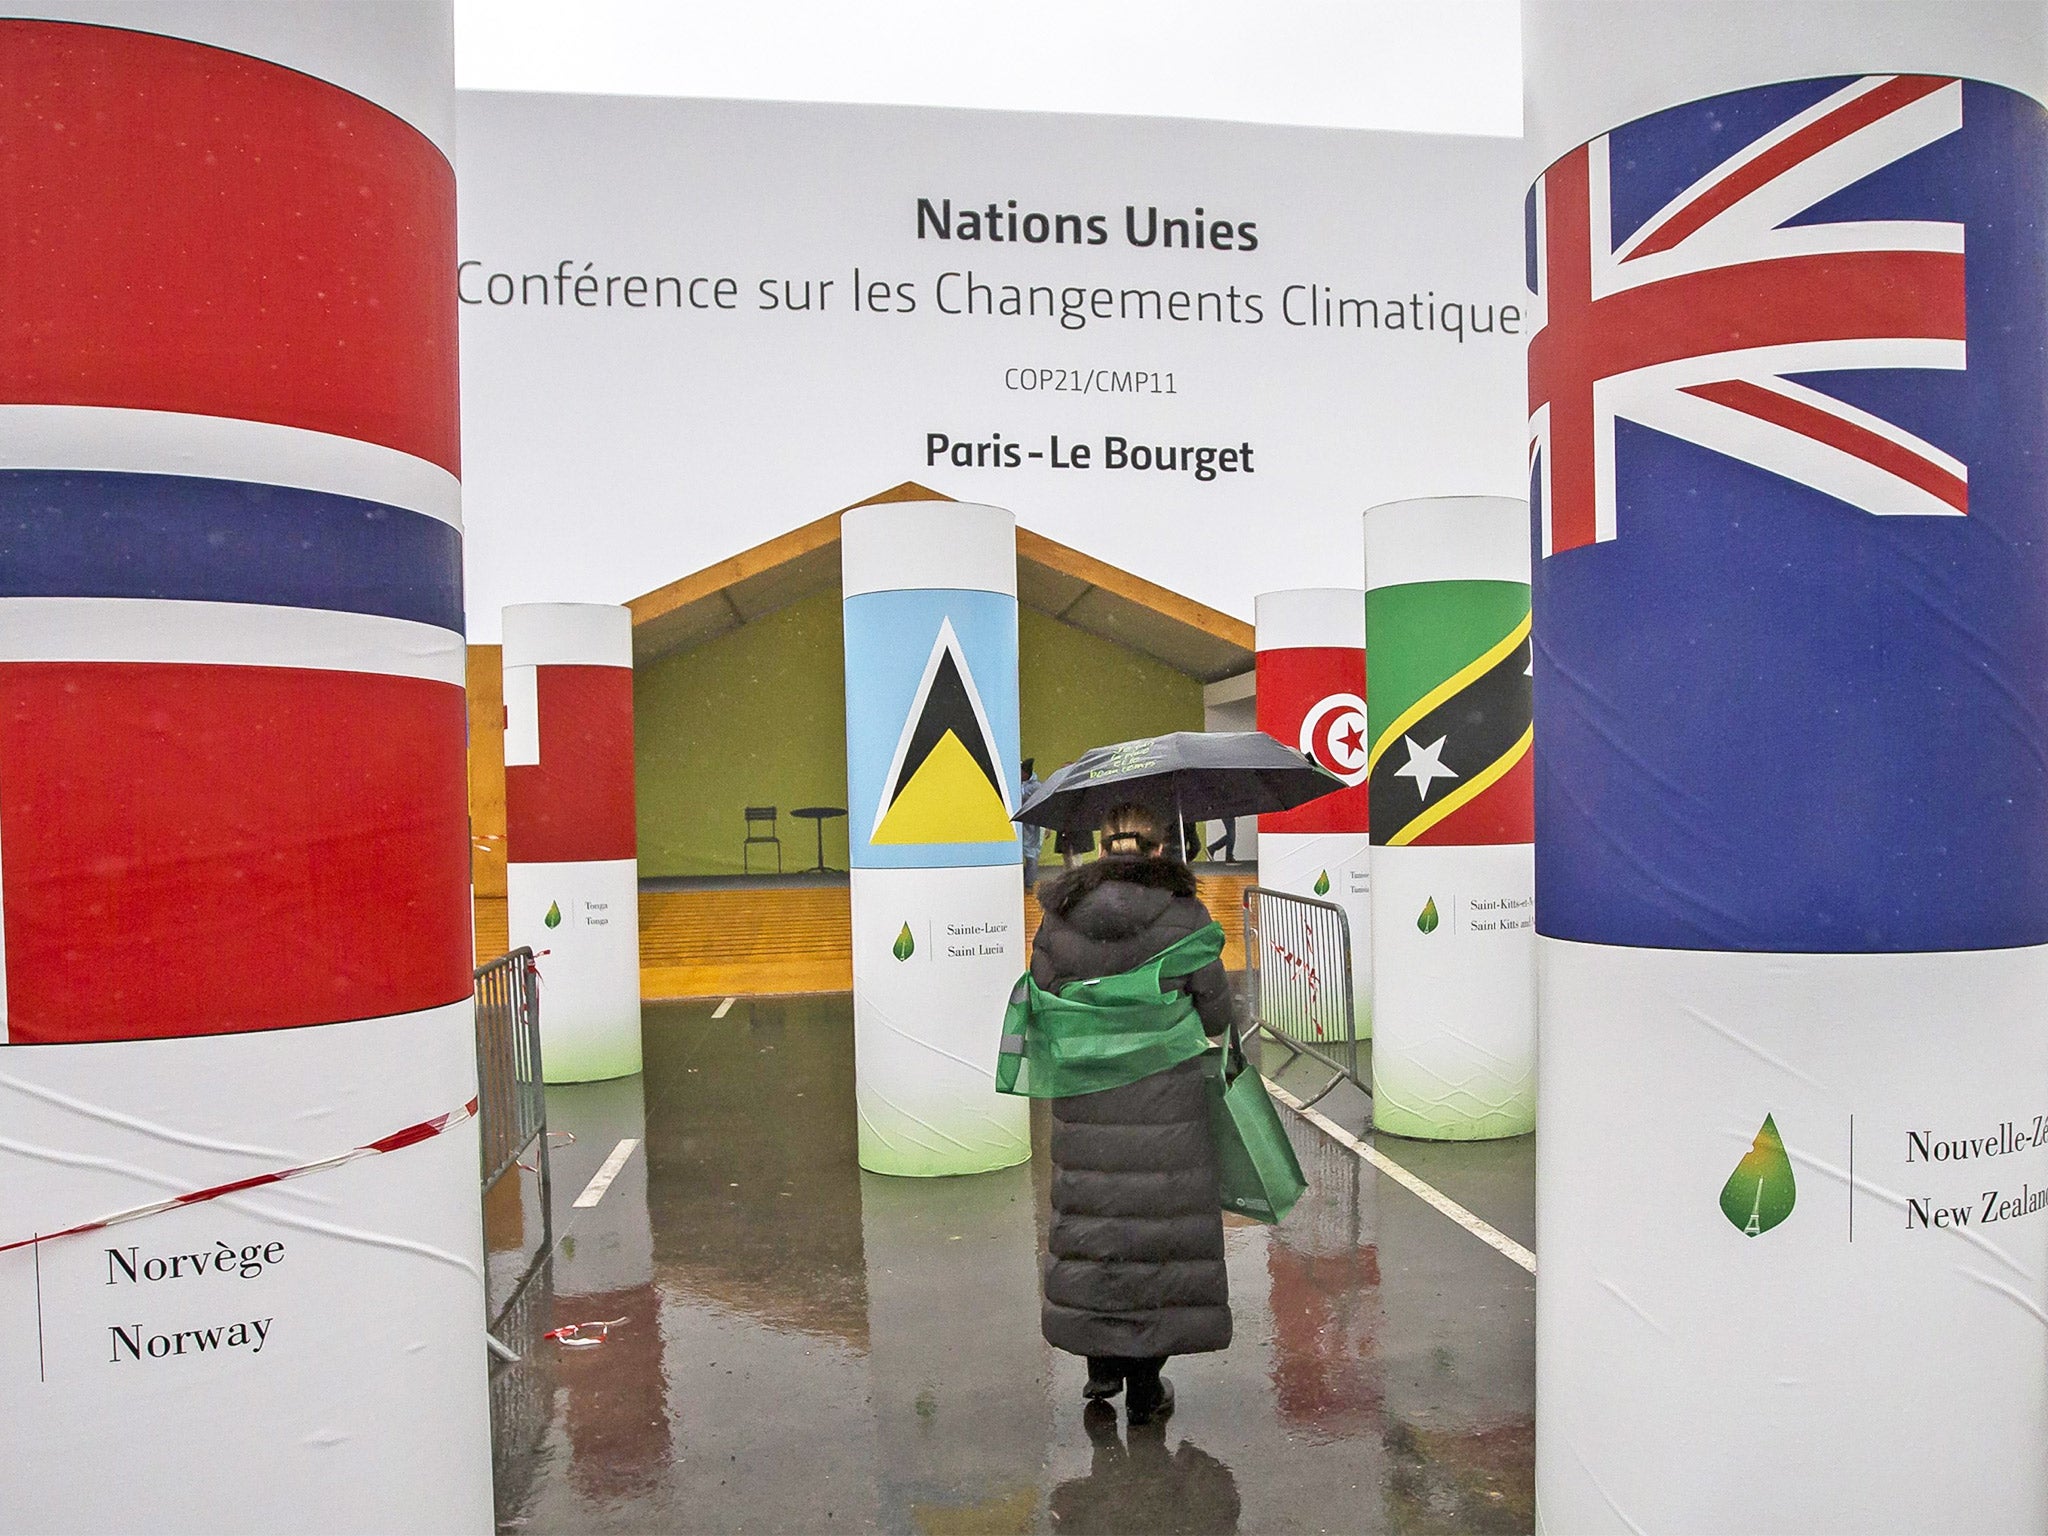 The entrance of the COP21 Climate Conference venue in Le Bourget. Talks will take place from 30 November to 11 December